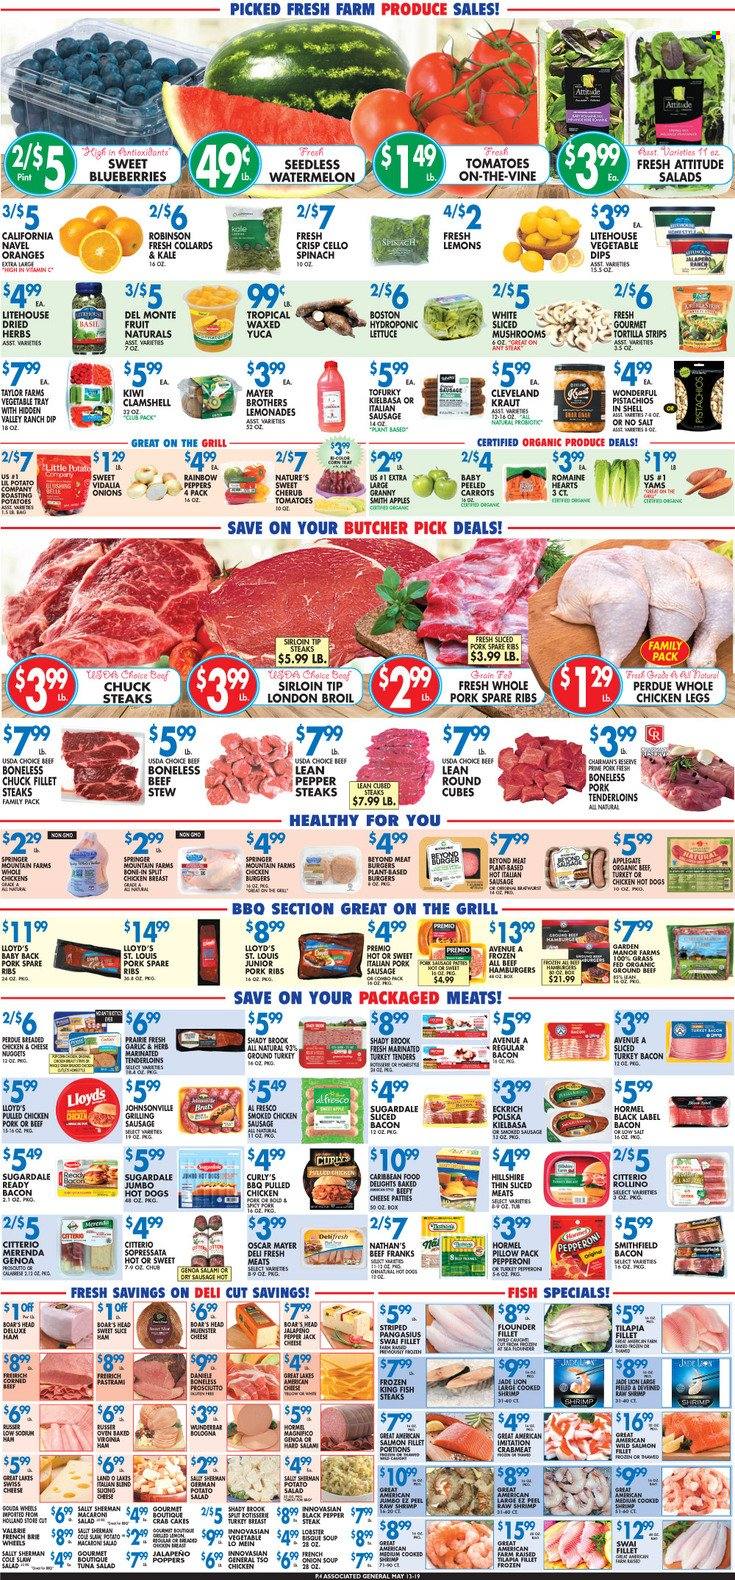 thumbnail - Associated Supermarkets Flyer - 05/20/2022 - 05/26/2022 - Sales products - mushrooms, tortillas, carrots, tomatoes, potatoes, peppers, jalapeño, apples, kiwi, watermelon, oranges, Granny Smith, crab meat, flounder, salmon, salmon fillet, tilapia, tuna, pangasius, fish, king fish, shrimps, swai fillet, crab cake, hot dog, onion soup, macaroni, soup, nuggets, hamburger, fried chicken, cheese nuggets, lobster soup, Perdue®, pulled chicken, Hormel, Sugardale, bacon, salami, sliced turkey, turkey bacon, ham, prosciutto, pastrami, bologna sausage, virginia ham, Johnsonville, Oscar Mayer, sausage, pork sausage, pepperoni, chicken sausage, italian sausage, kielbasa, potato salad, tuna salad, corned beef, american cheese, gouda, swiss cheese, Pepper Jack cheese, Münster cheese, dip, esponja, black pepper, pistachios, BROTHERS, ground turkey, turkey breast, whole chicken, chicken legs, beef meat, beef sirloin, ground beef, steak, pork meat, pork ribs, pork tenderloin, pork spare ribs, pork back ribs, vitamin c, lemons, navel oranges. Page 4.